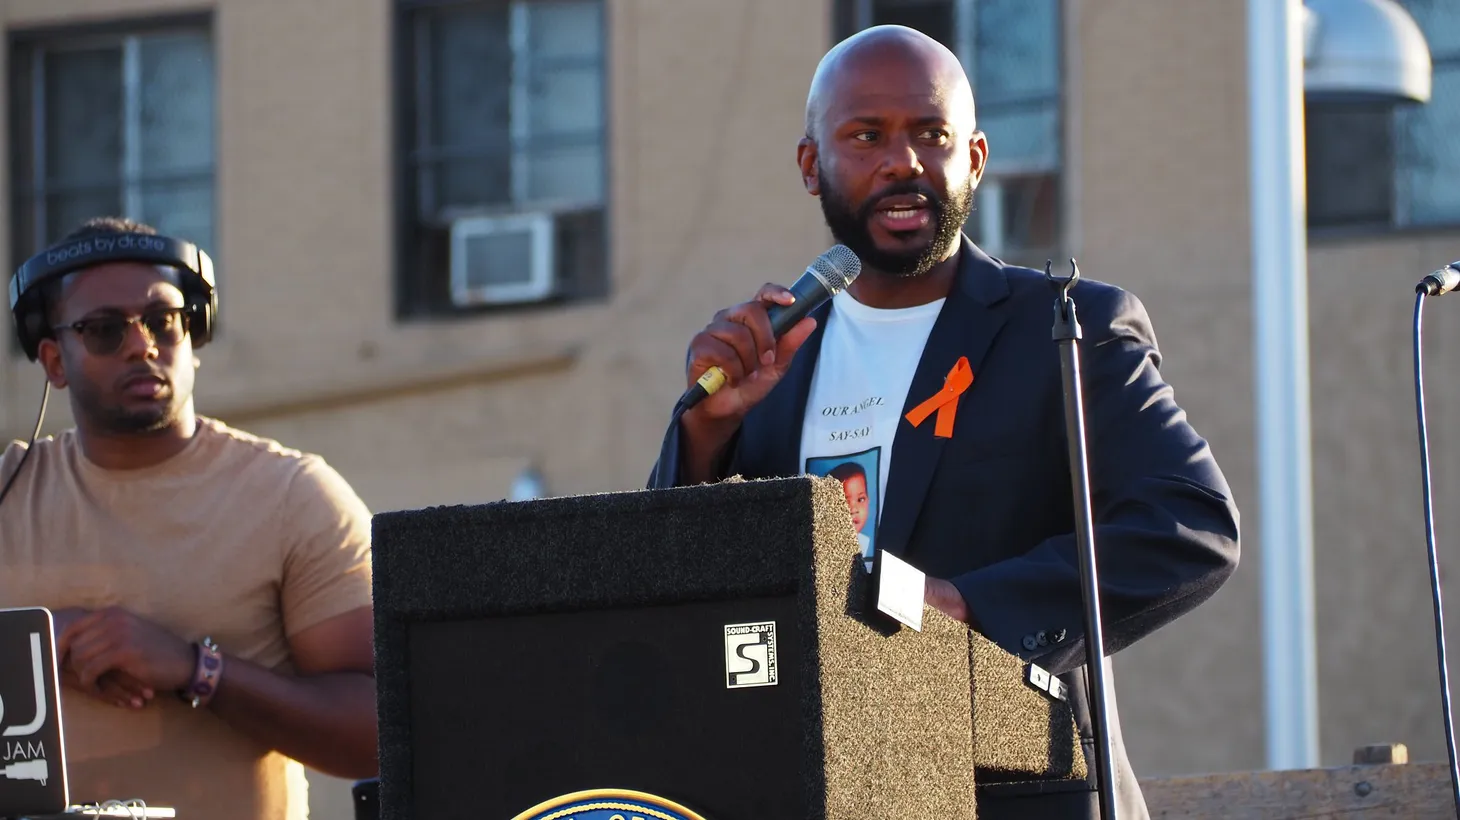 State Assemblymember Mike Gipson has been pushing to end gun violence for California, especially in his district, which includes South LA. “We wish that people die of old age — not by gun violence, not now, not in this state,” says Gipson.